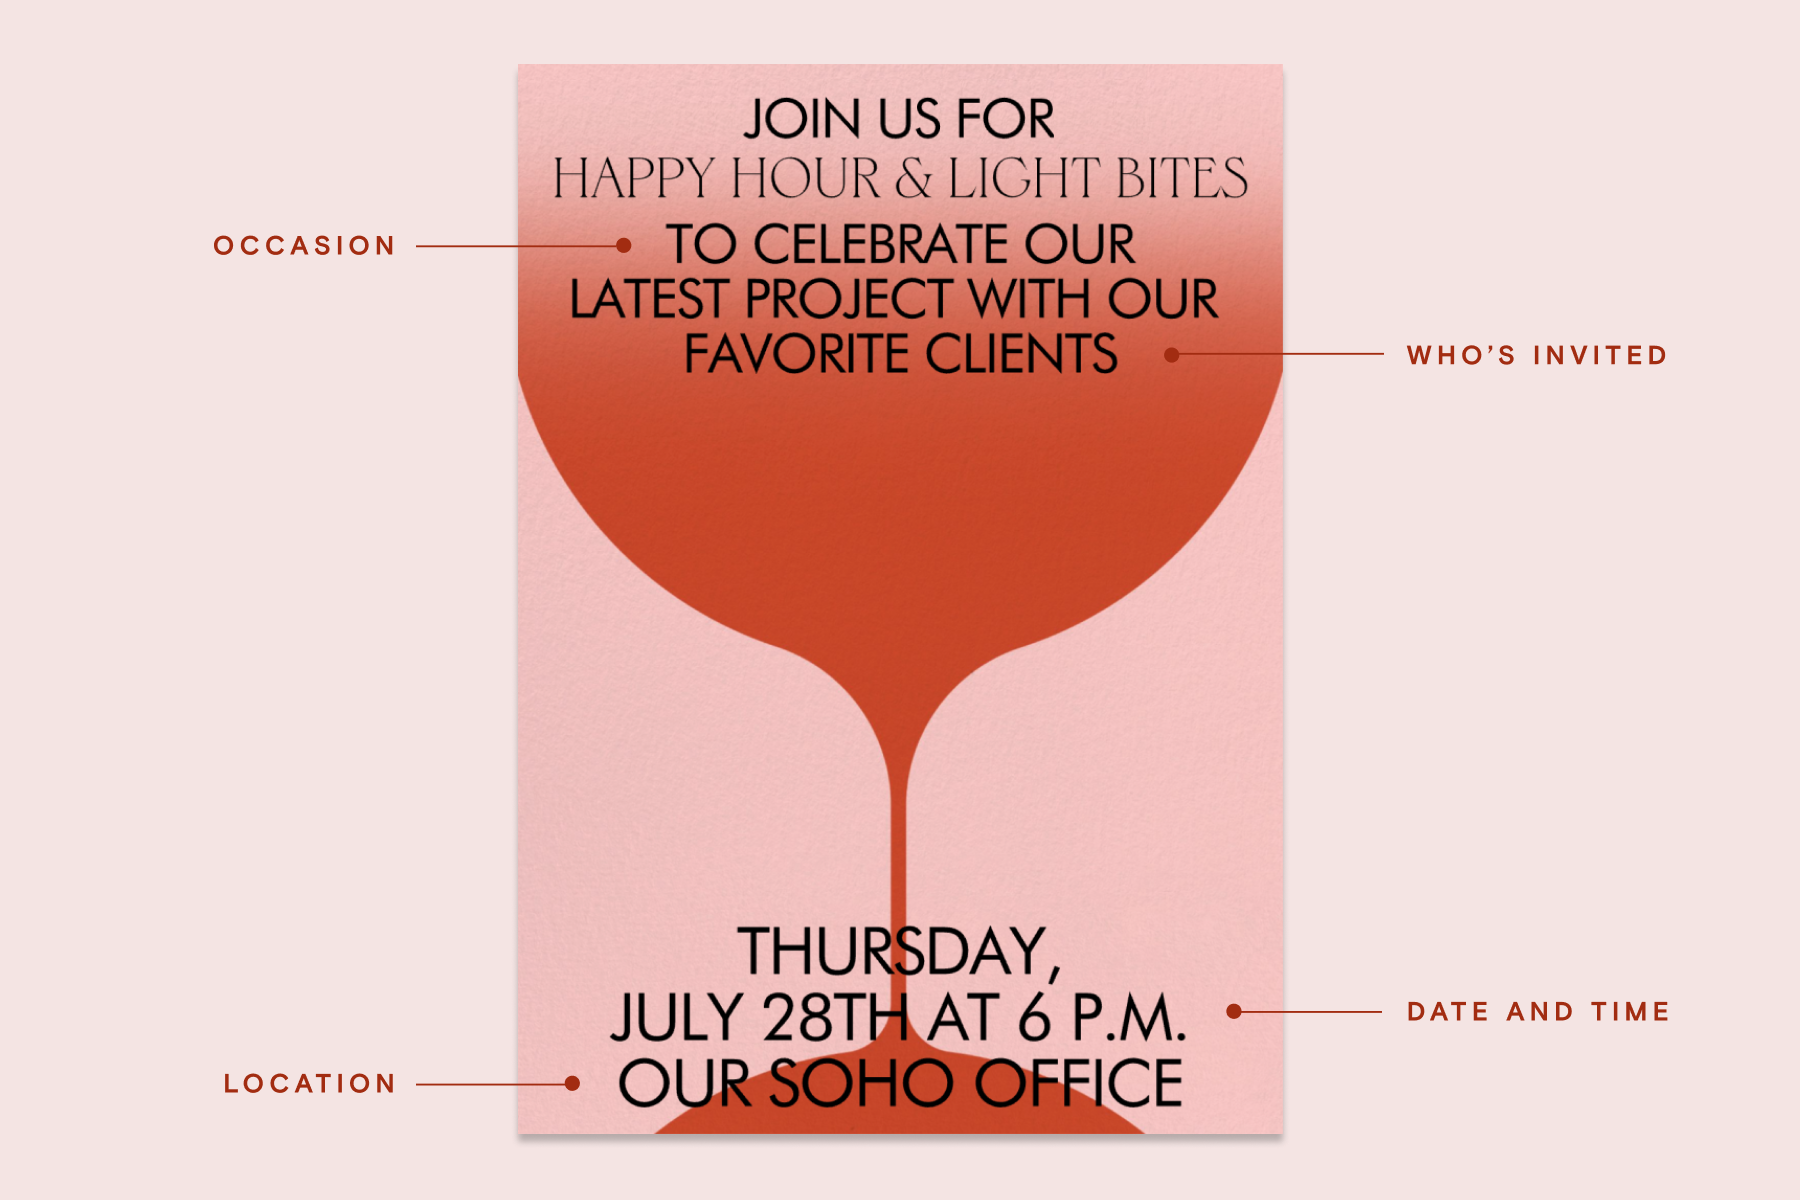 A pink invitation with a large red stemmed glass and the event details diagrammed out on the sides.